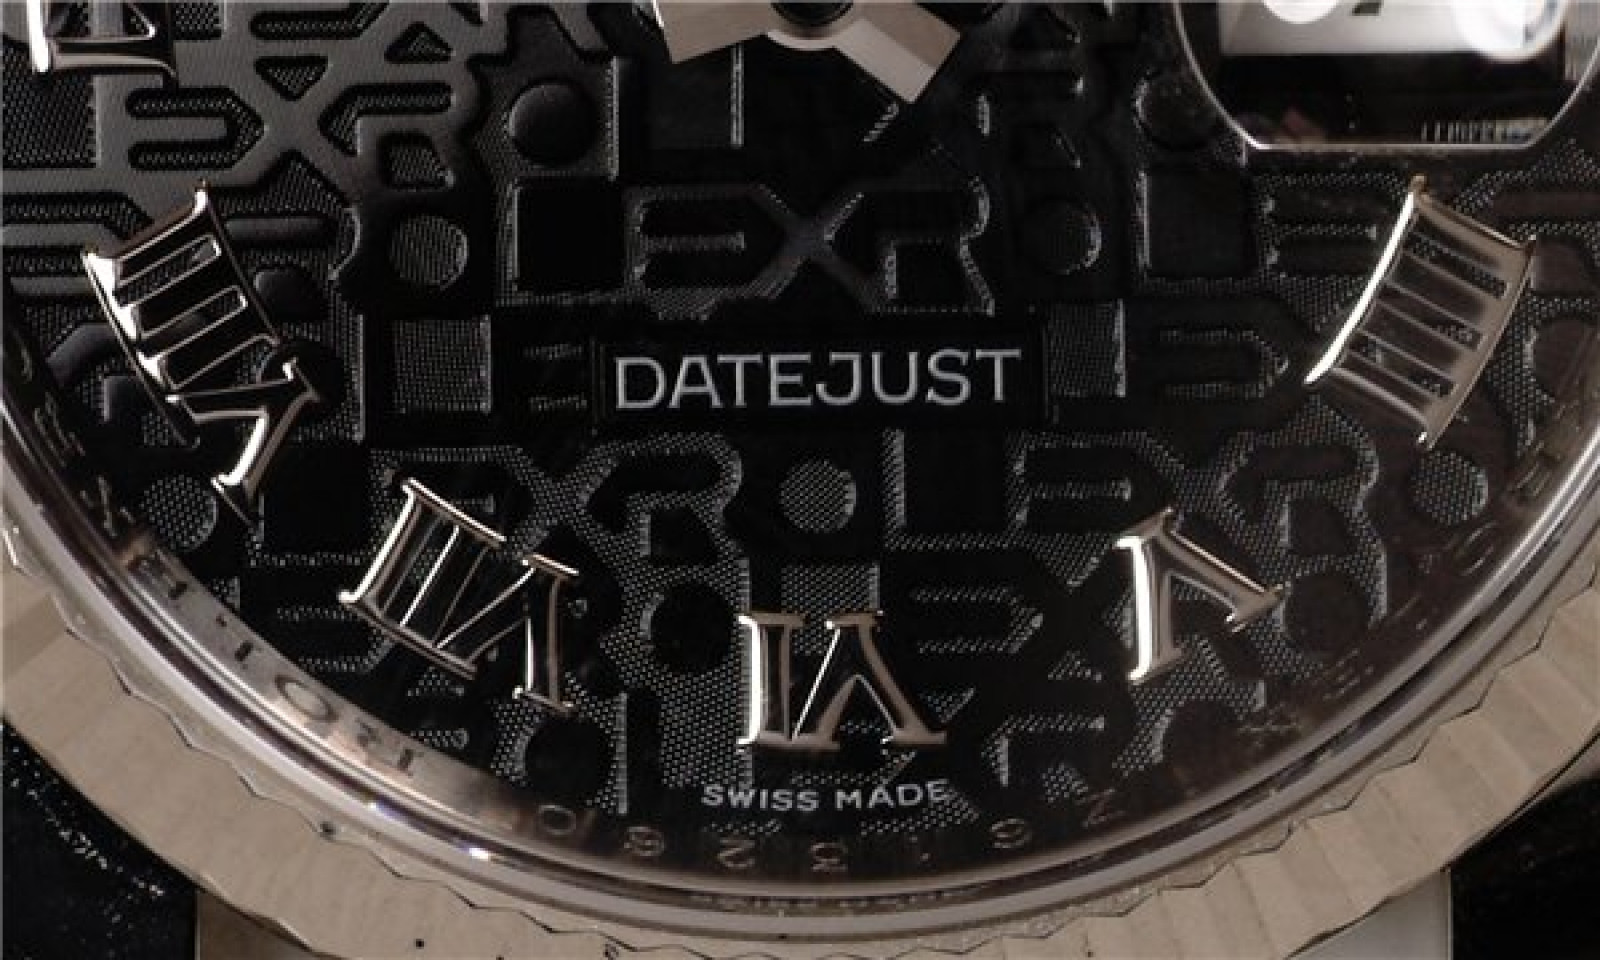 Rolex Datejust 116234 Steel with Black Dial